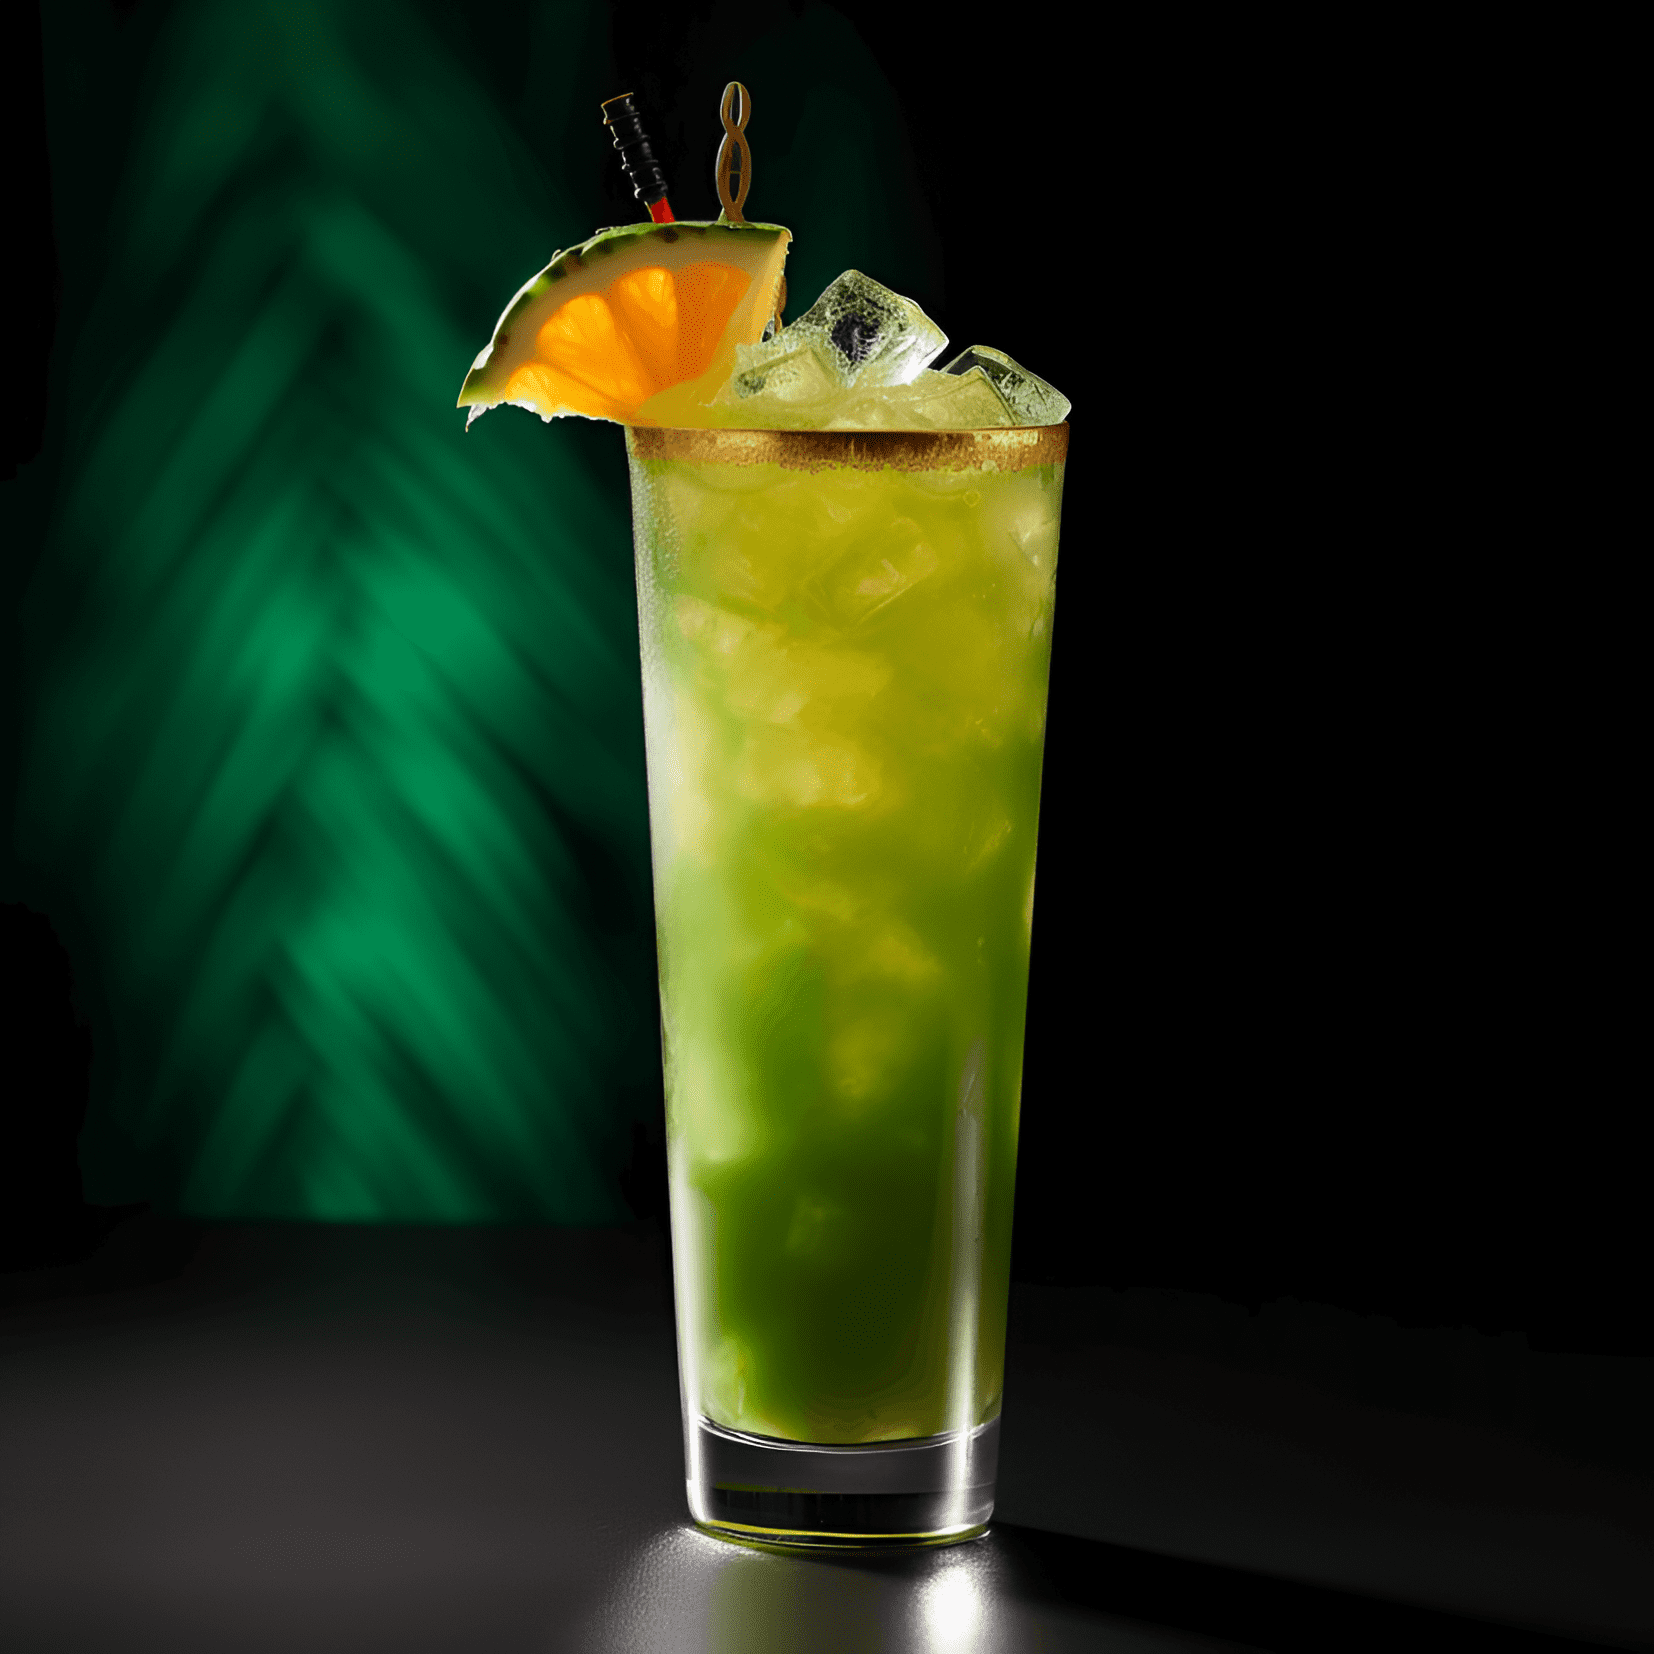 Iguana Cocktail Recipe - The Iguana cocktail is a delightful mix of sweet, sour, and fruity flavors. The combination of pineapple, lime, and orange juices creates a tangy and refreshing taste, while the addition of melon liqueur adds a subtle sweetness. The overall flavor is light, crisp, and tropical.